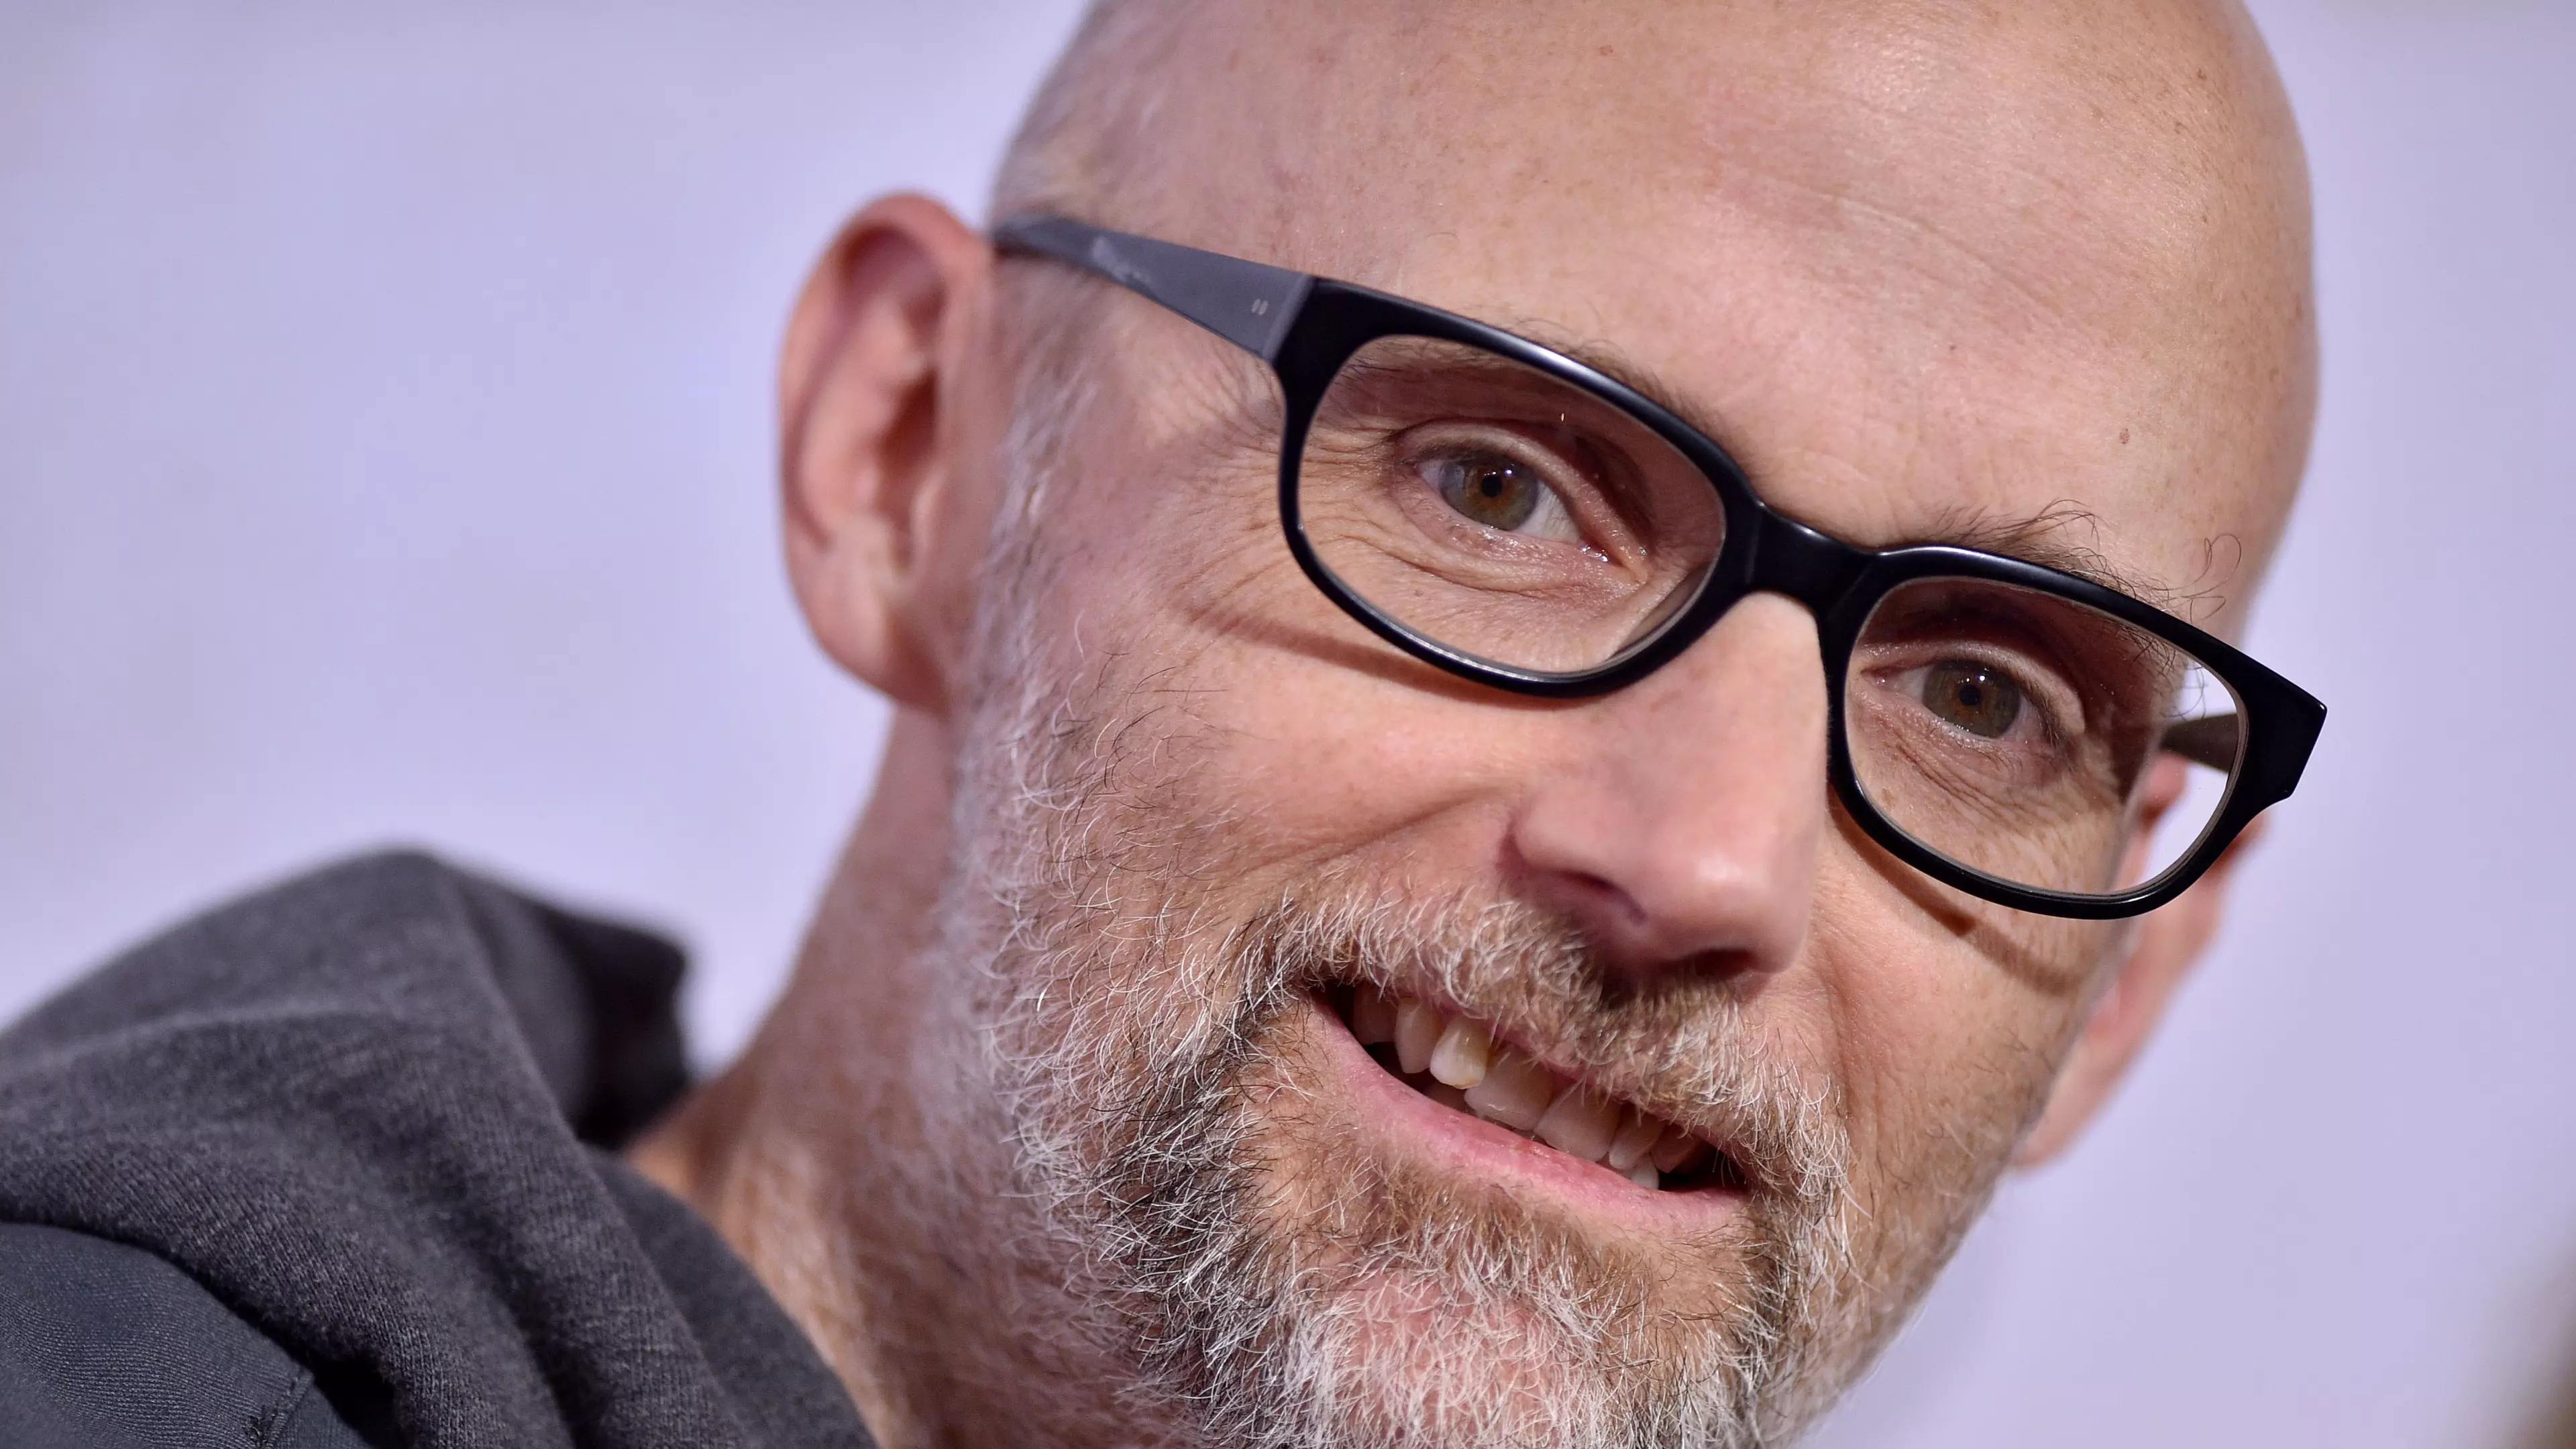 Singer Moby Just Got A 'Vegan For Life' Tattoo On His Neck